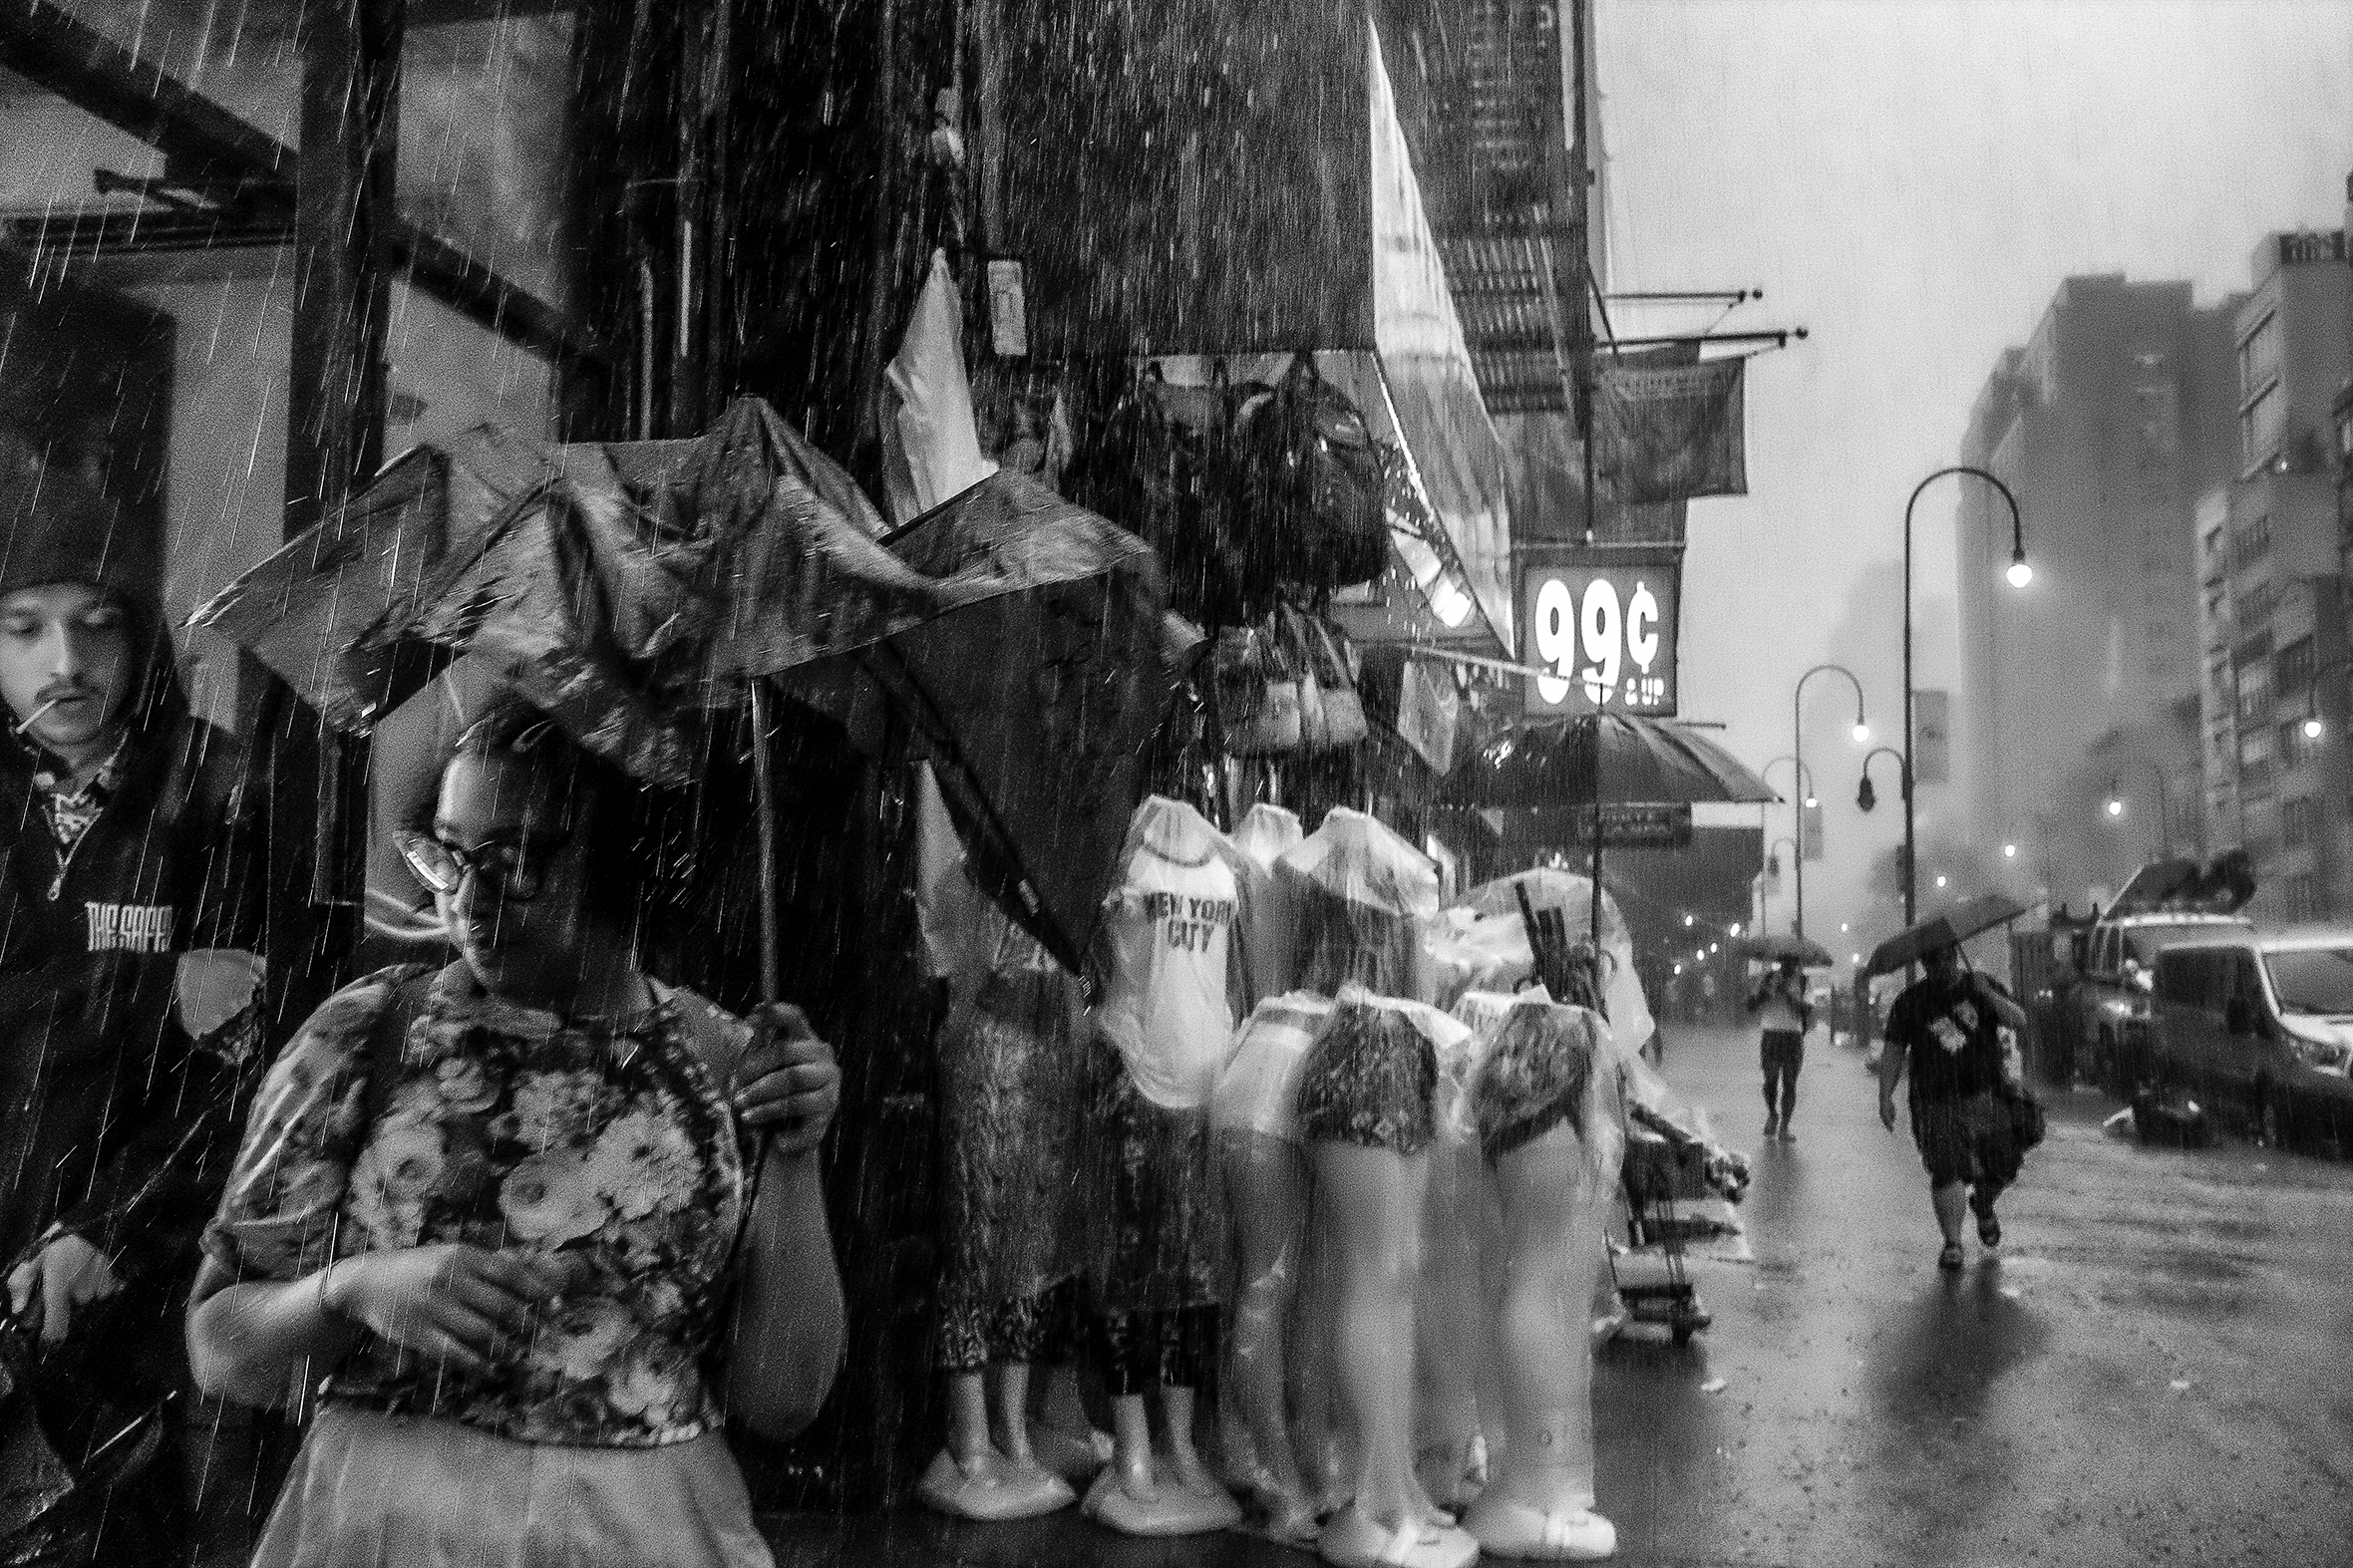 A woman with dark-framed glasses and a flowered top is caught in a rainstorm on W 14th Street in New York City with only a crumpled umbrella to try to stay dry. A group of headless full-body and torso mannequins are close by and covered in plastic.